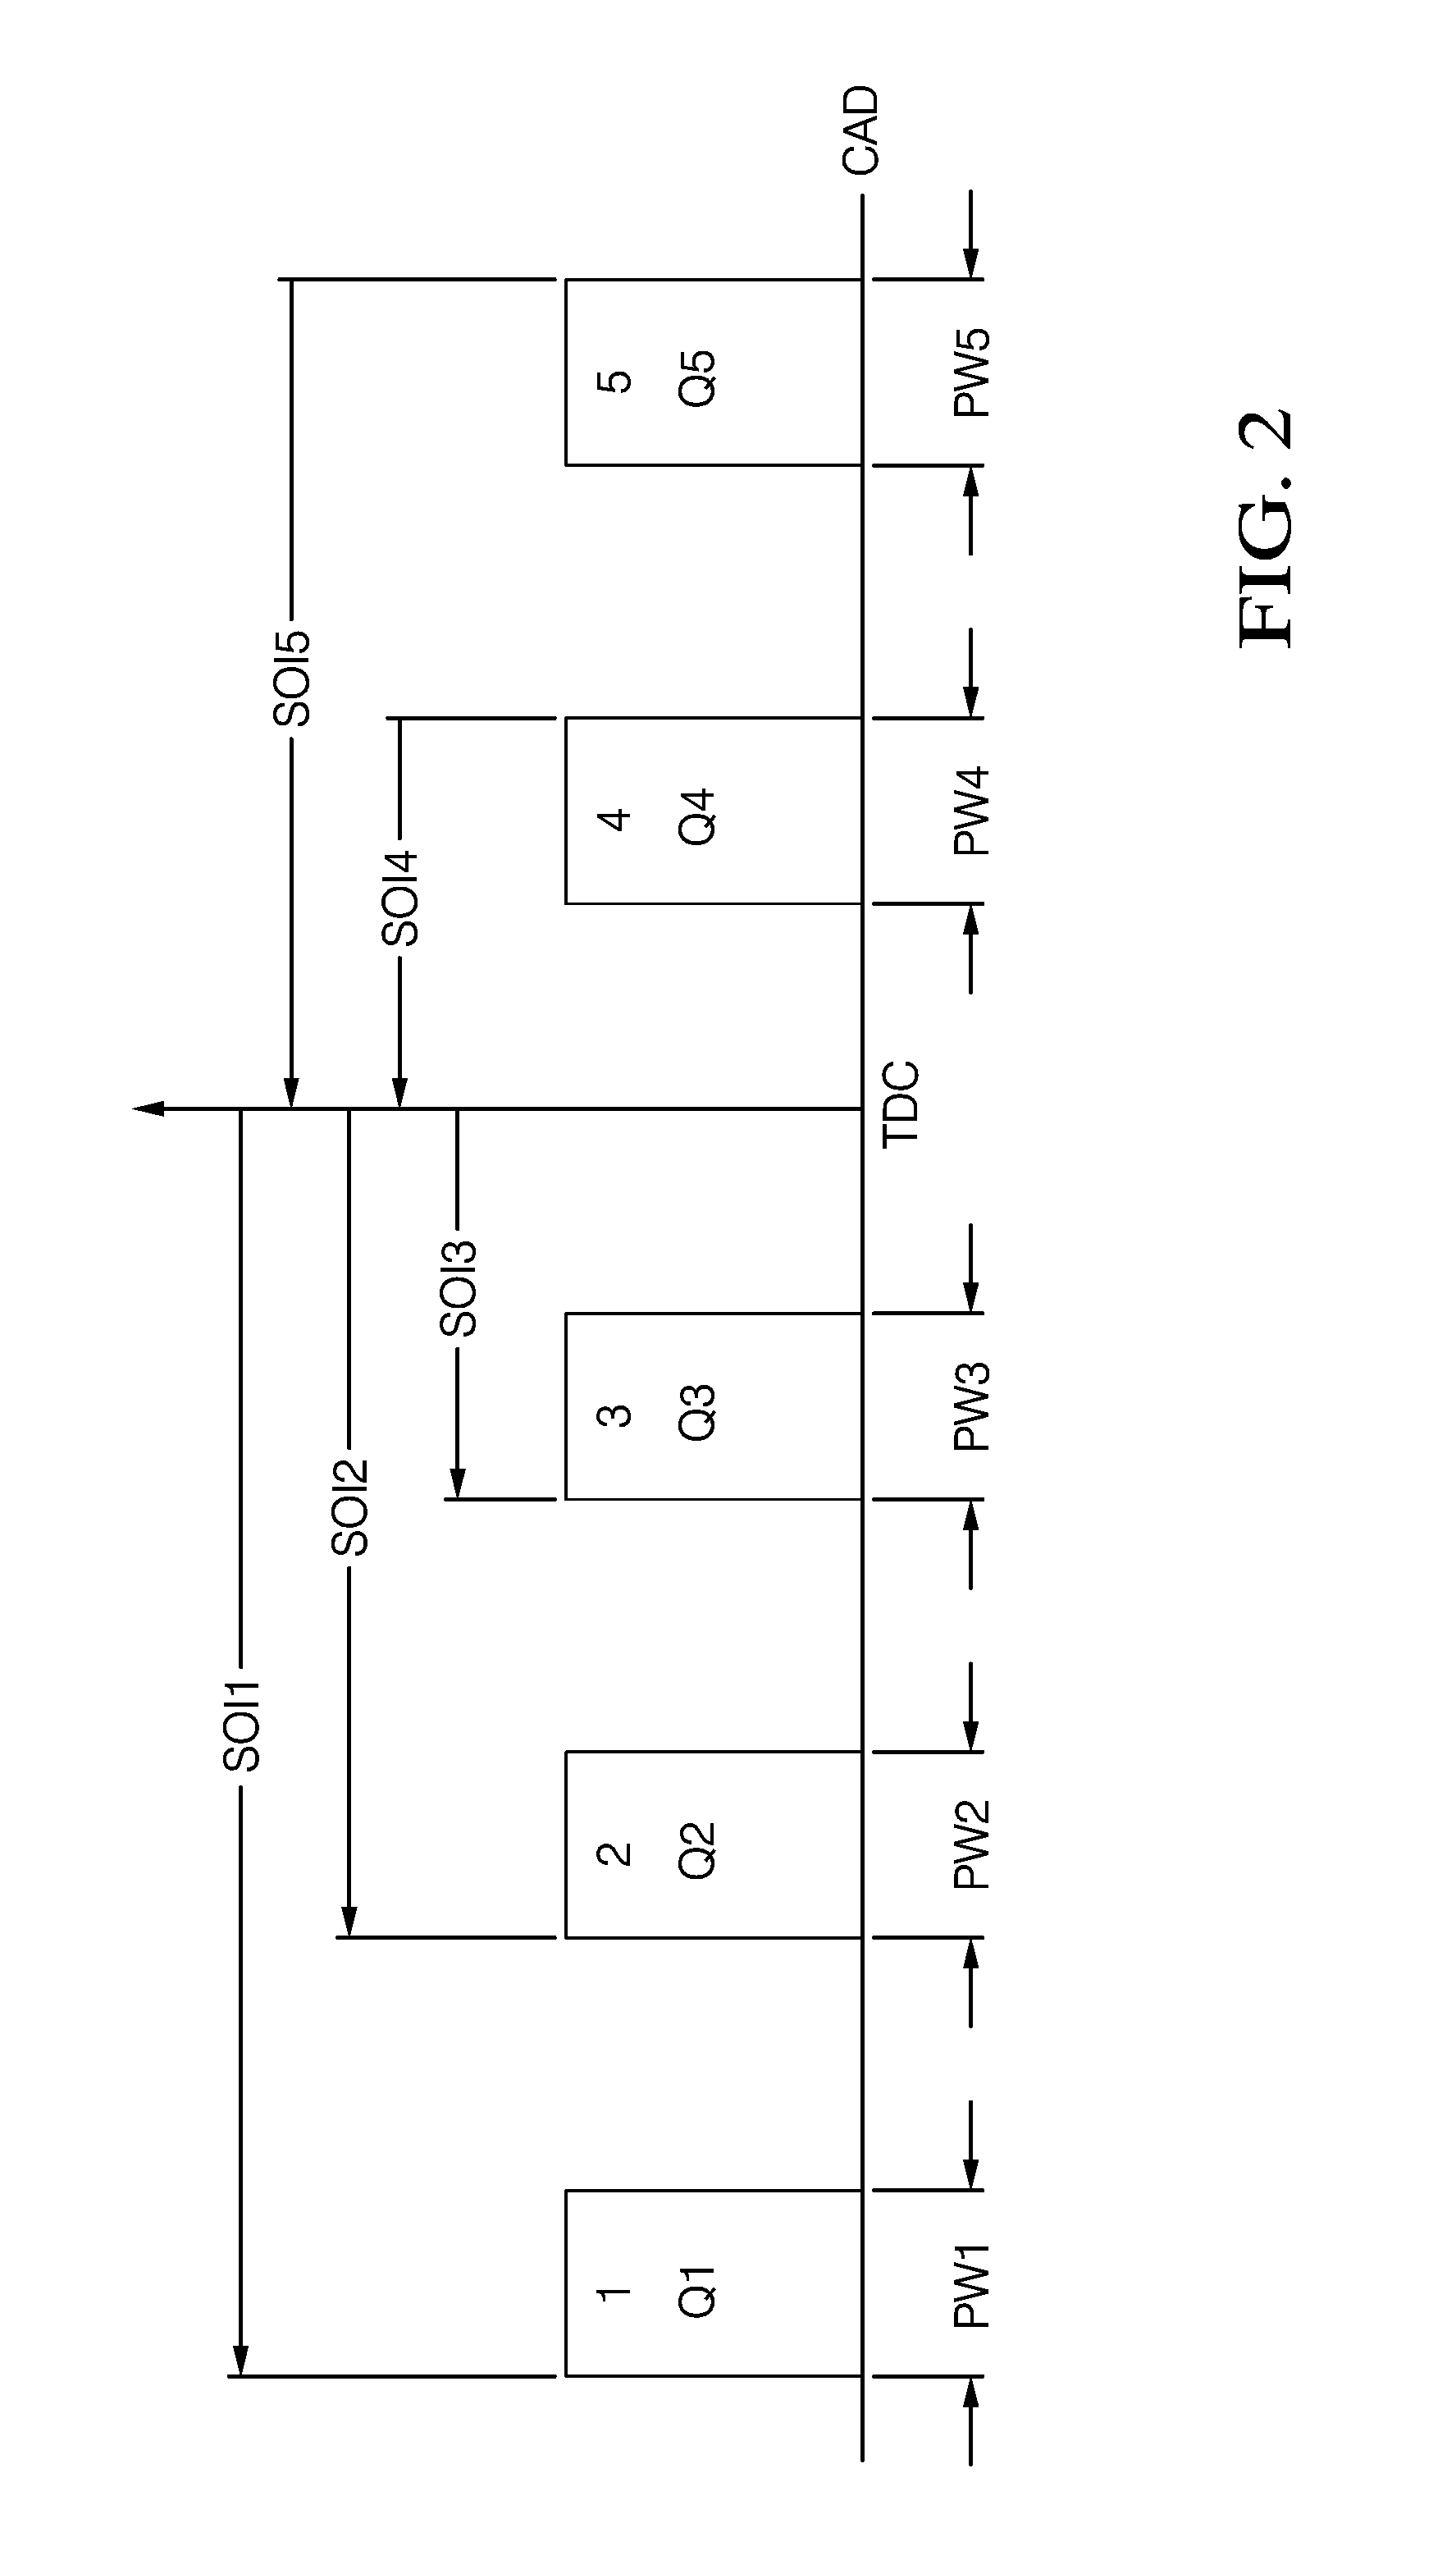 High-Efficiency Internal Combustion Engine and Method for Operating Employing Full-Time Low-Temperature Partially-Premixed Compression Ignition with Low Emissions